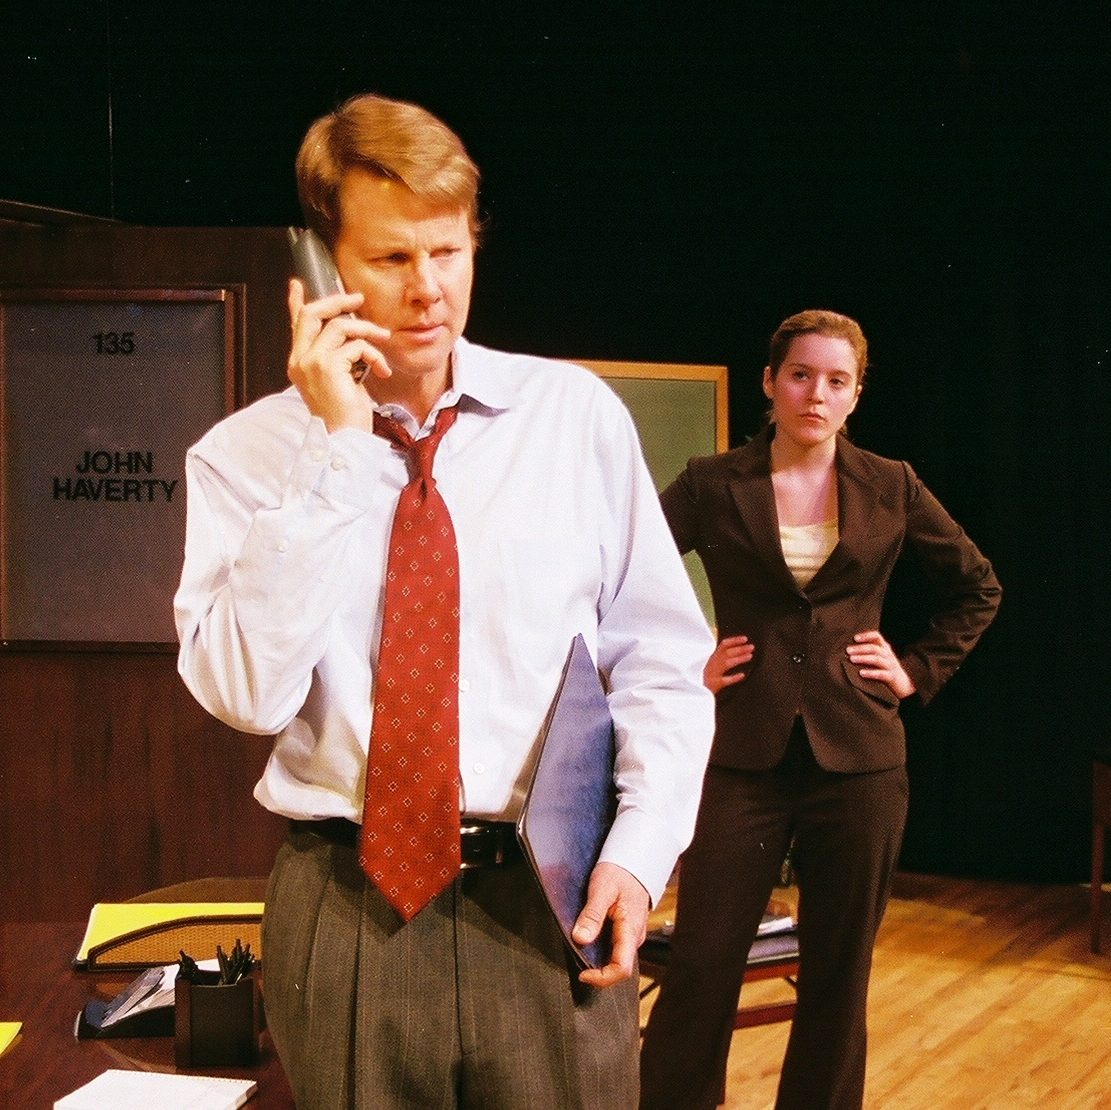 A man with a concerned expression speaks on a phone in the foreground while a woman stands behind him with her hands on her hips. The photo is from a 2006 production of Oleanna by David Mamet.